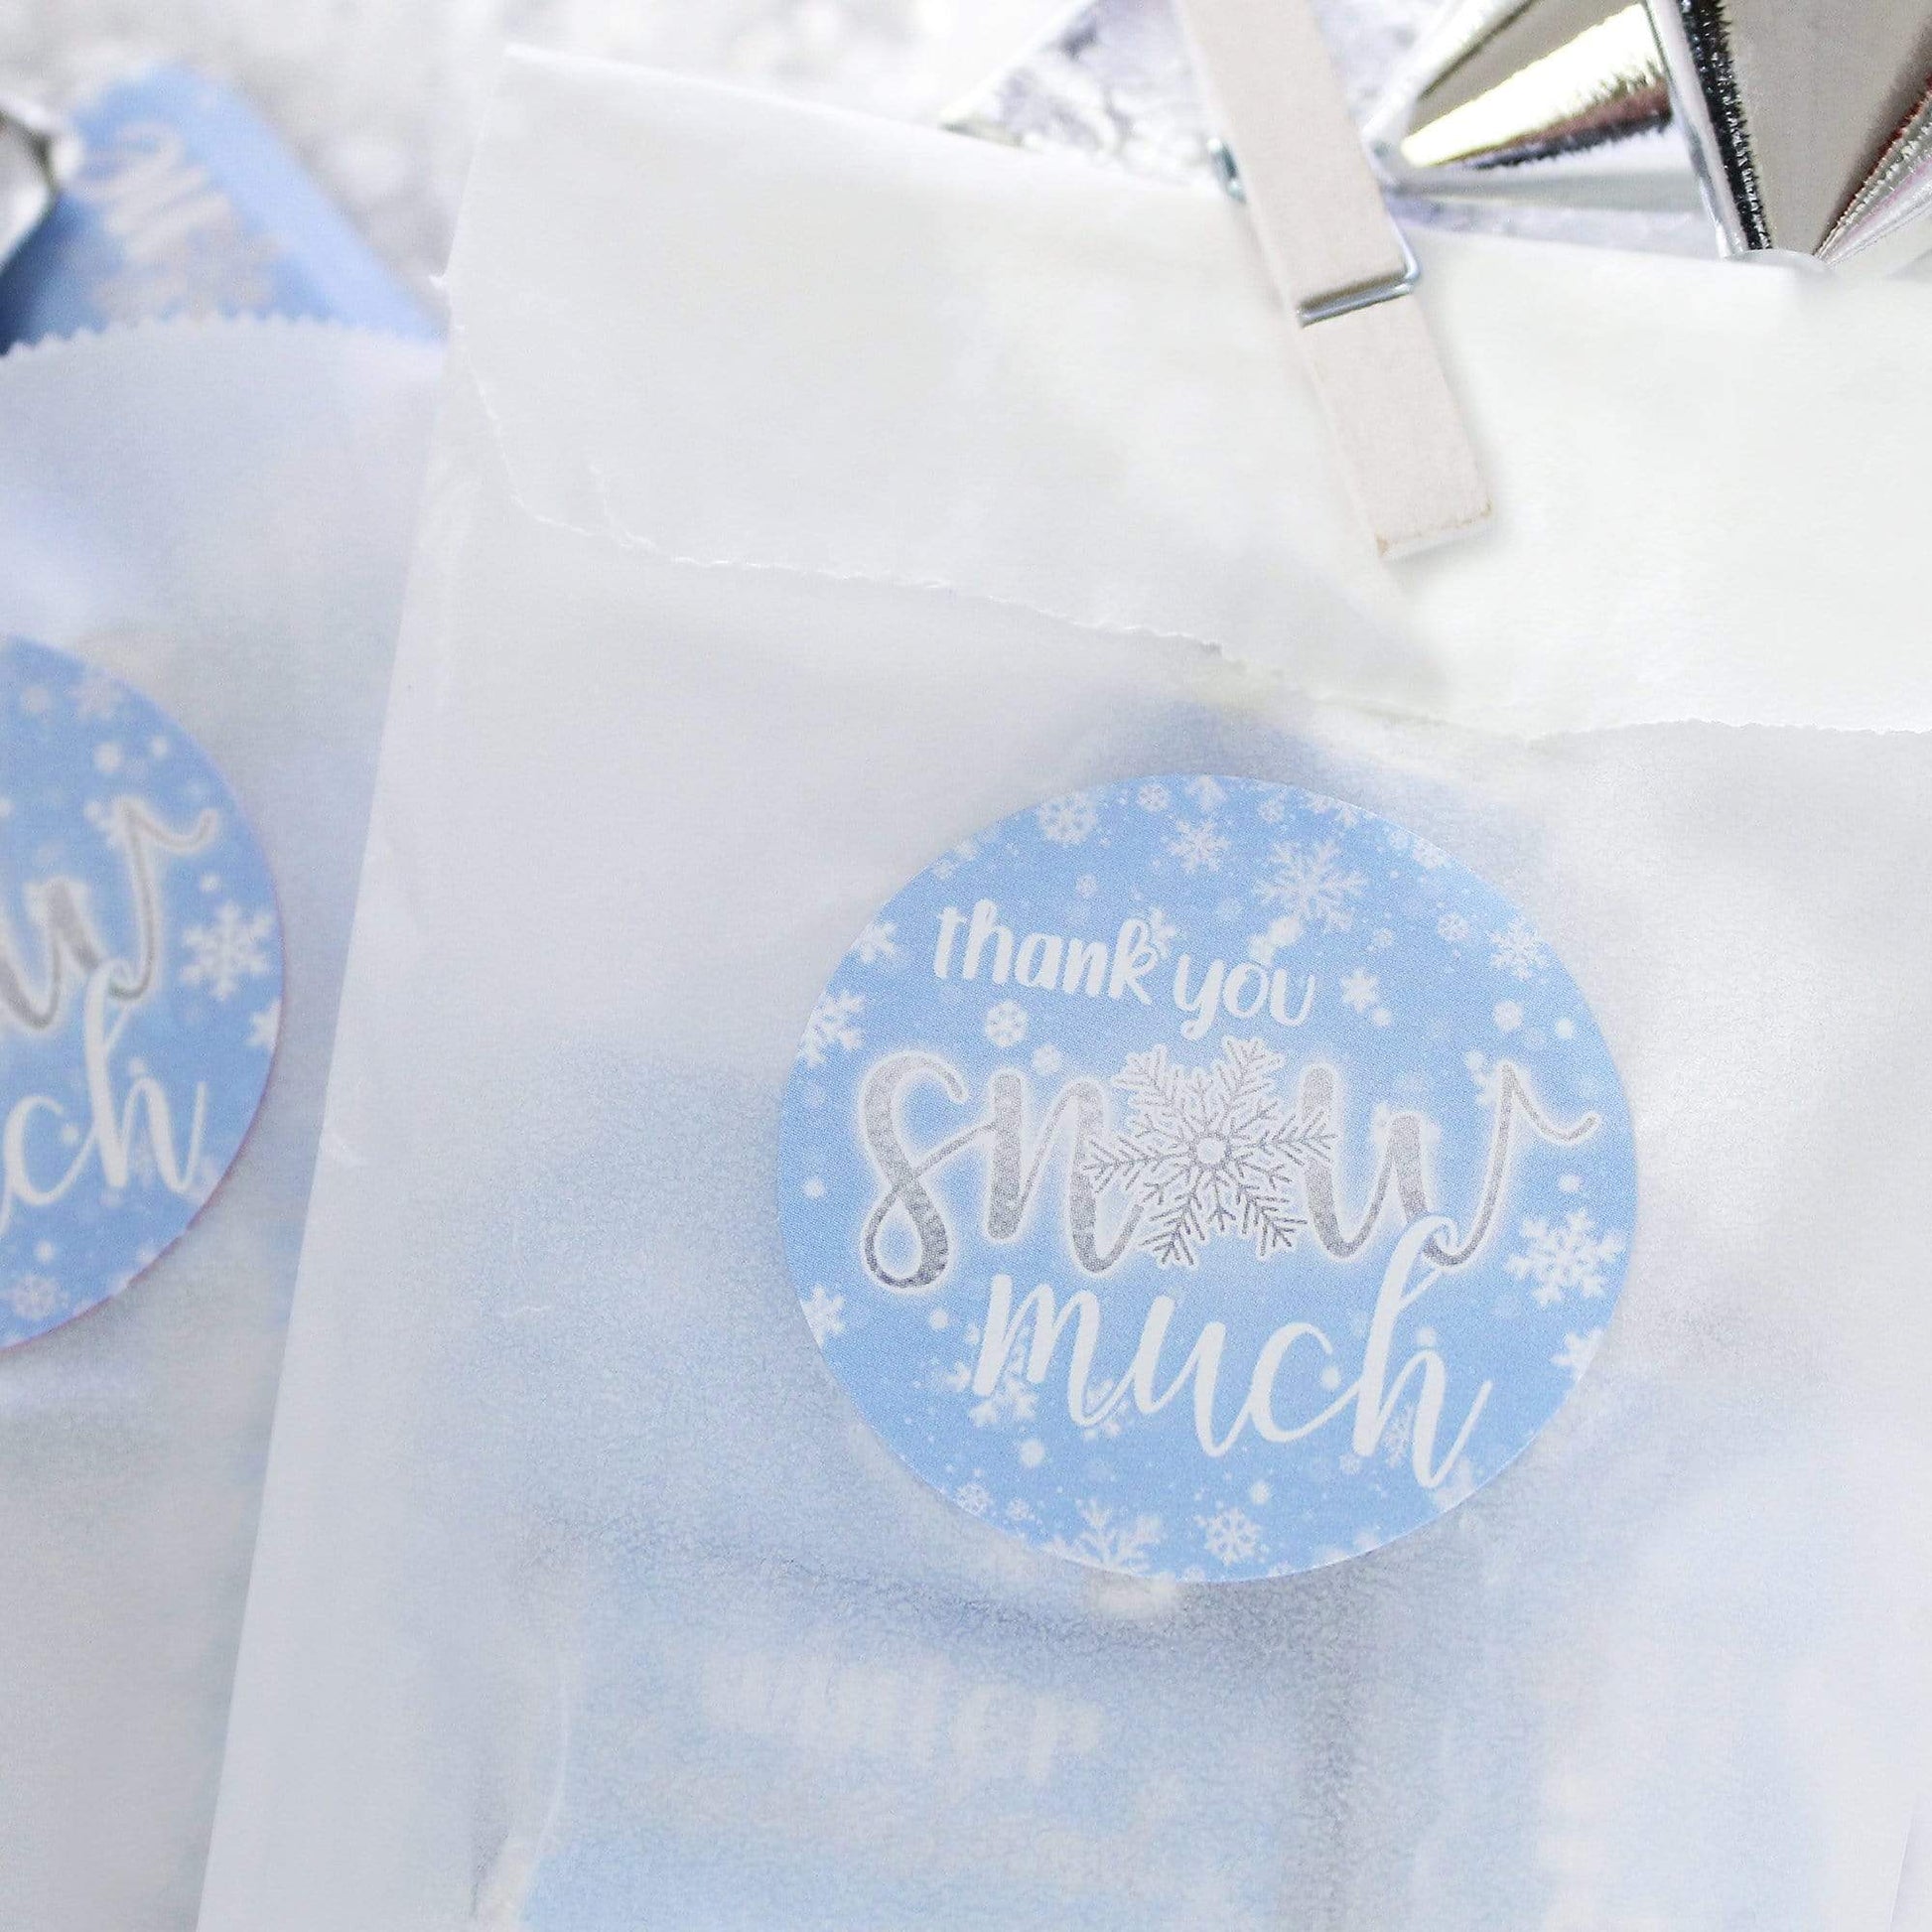 Add a special touch to your winter wonderland 1st birthday party with these Snow Much stickers